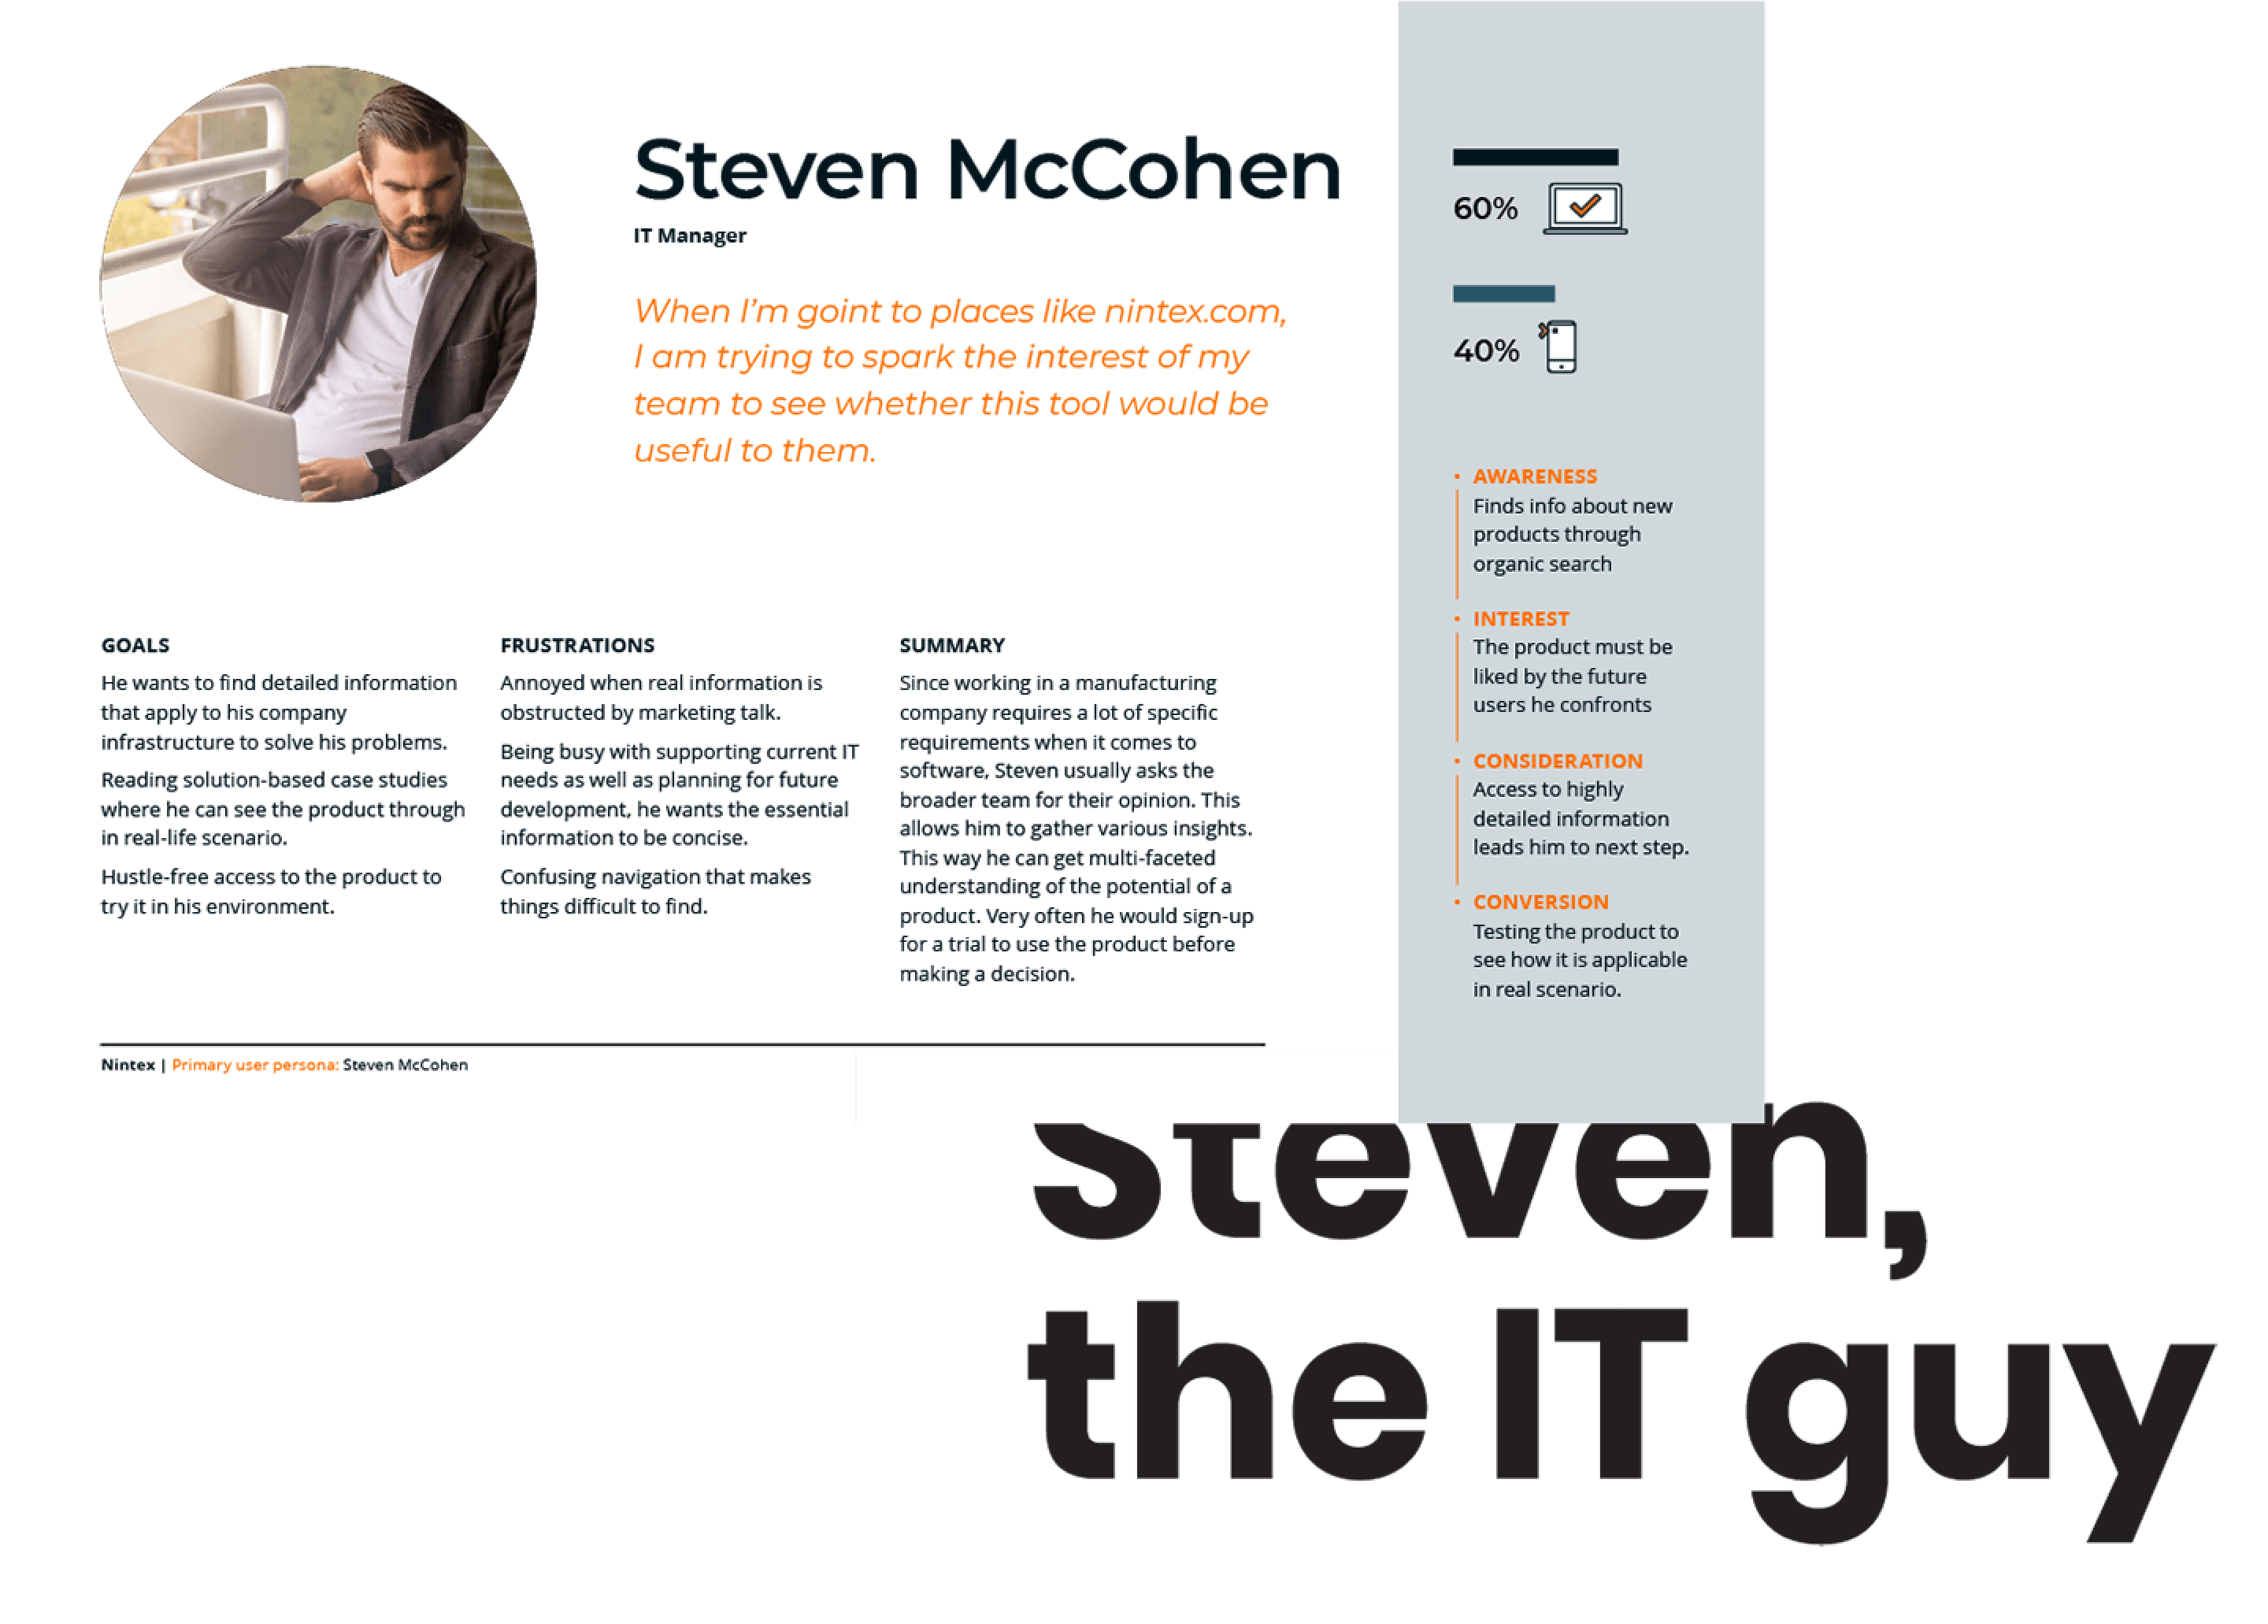 Persona profile of Steven, the IT guy that outlines his top needs